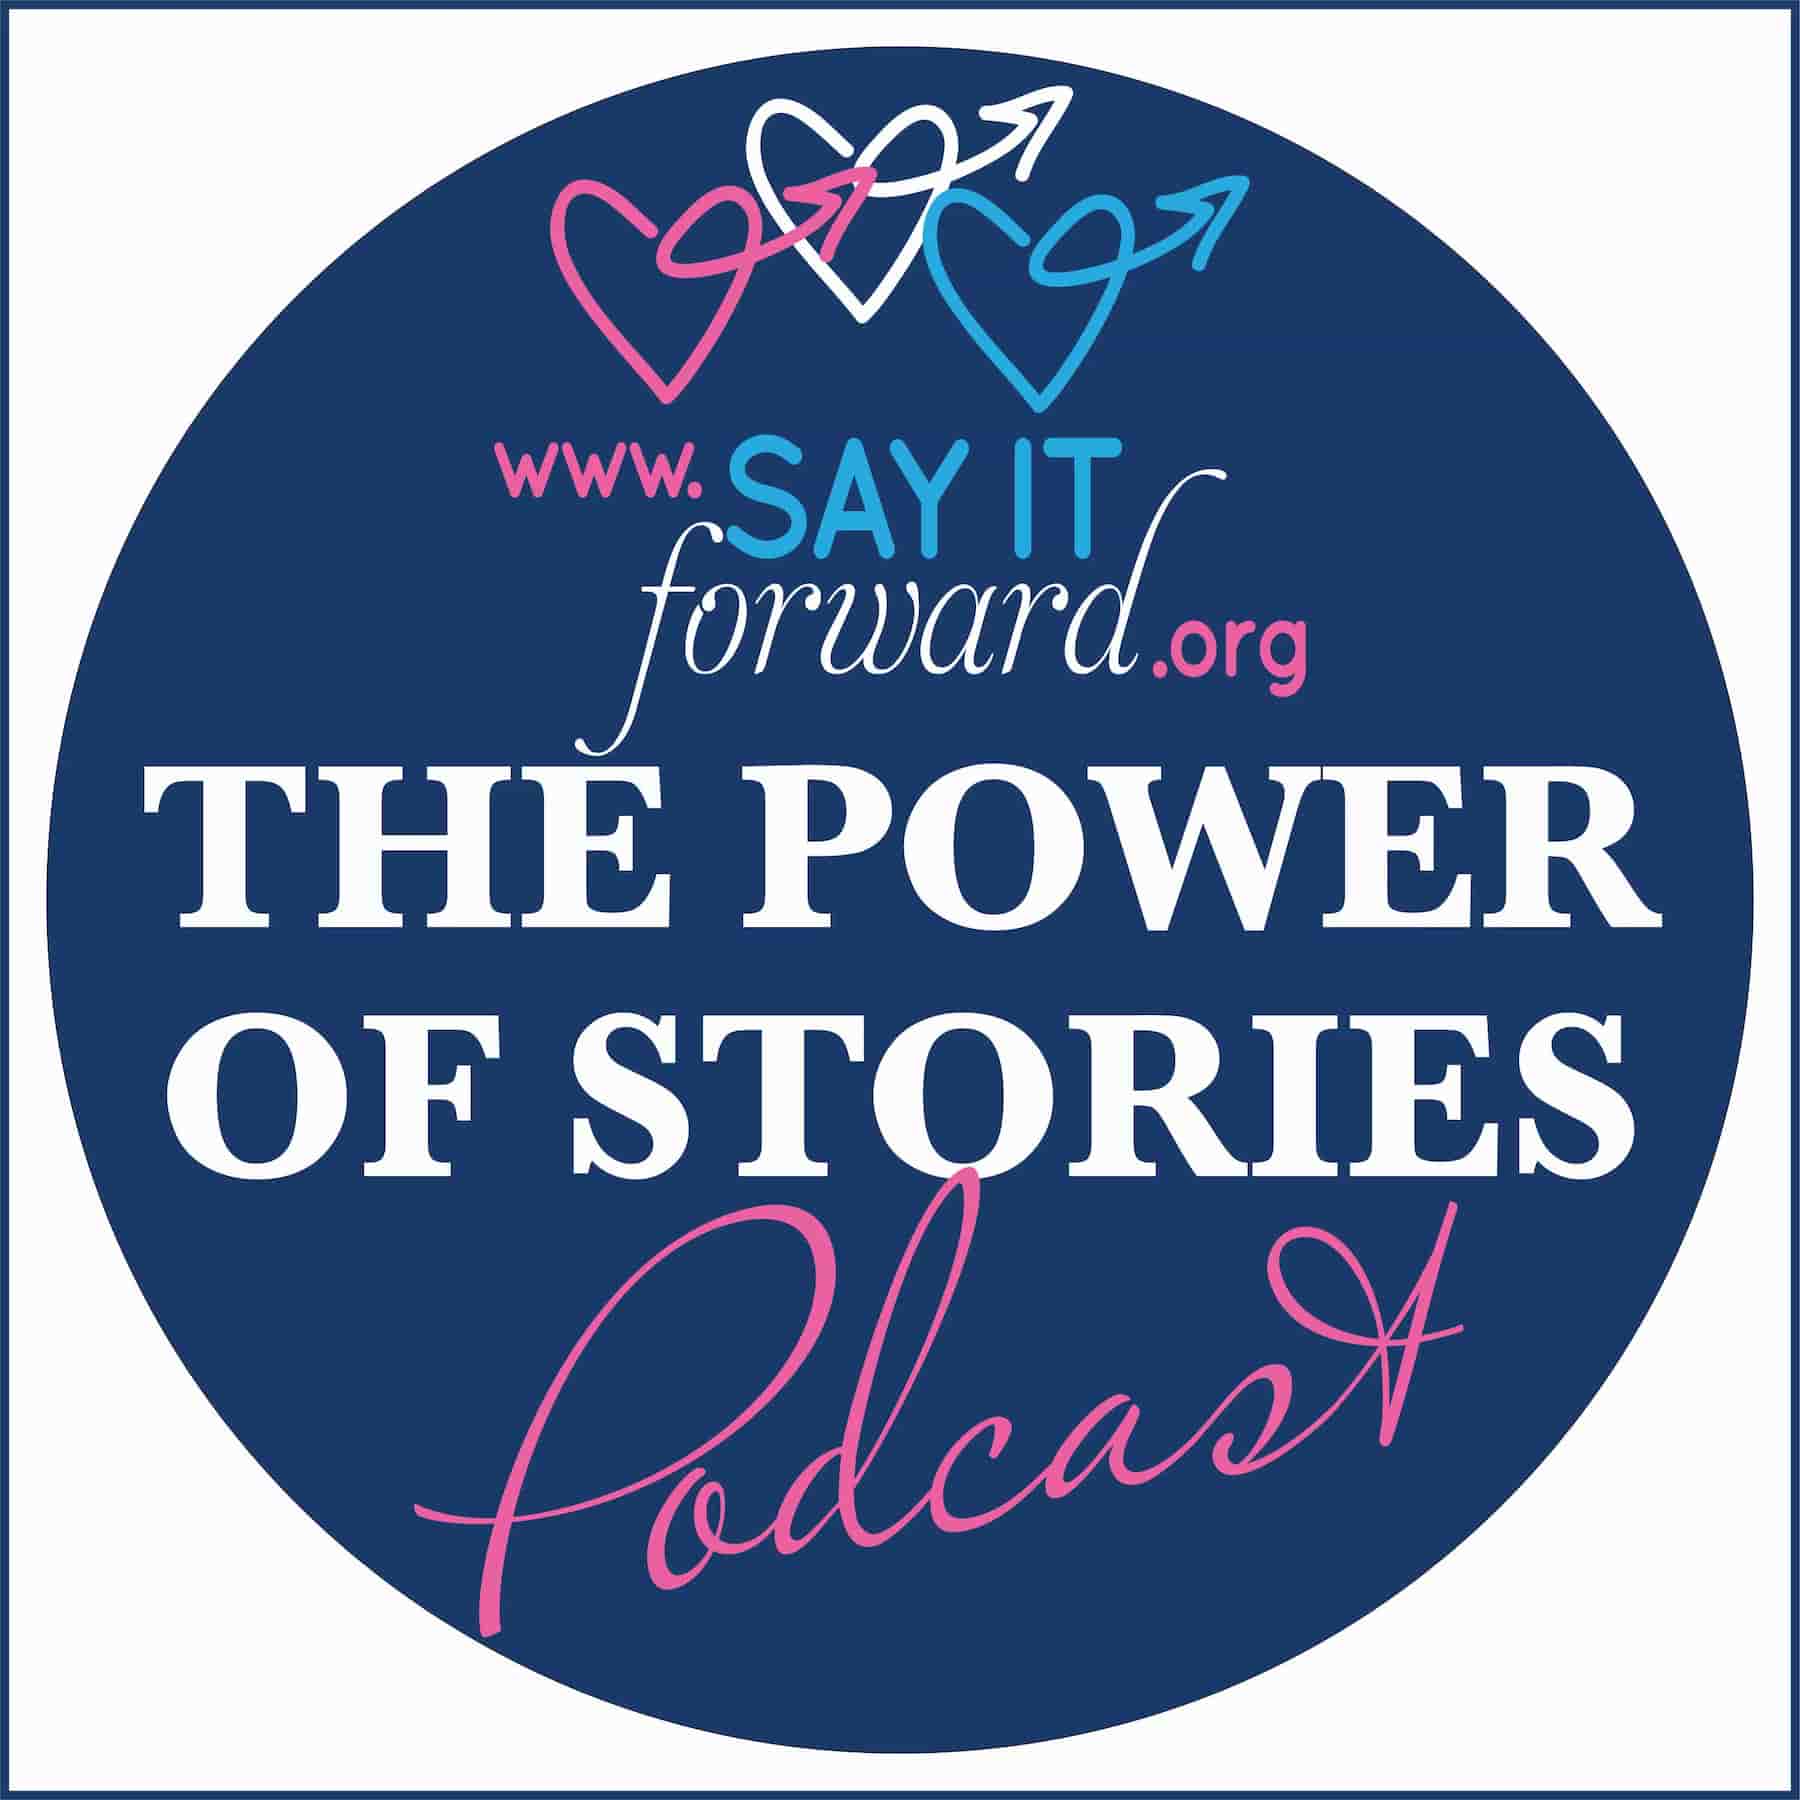 The Power Of Stories Podcast